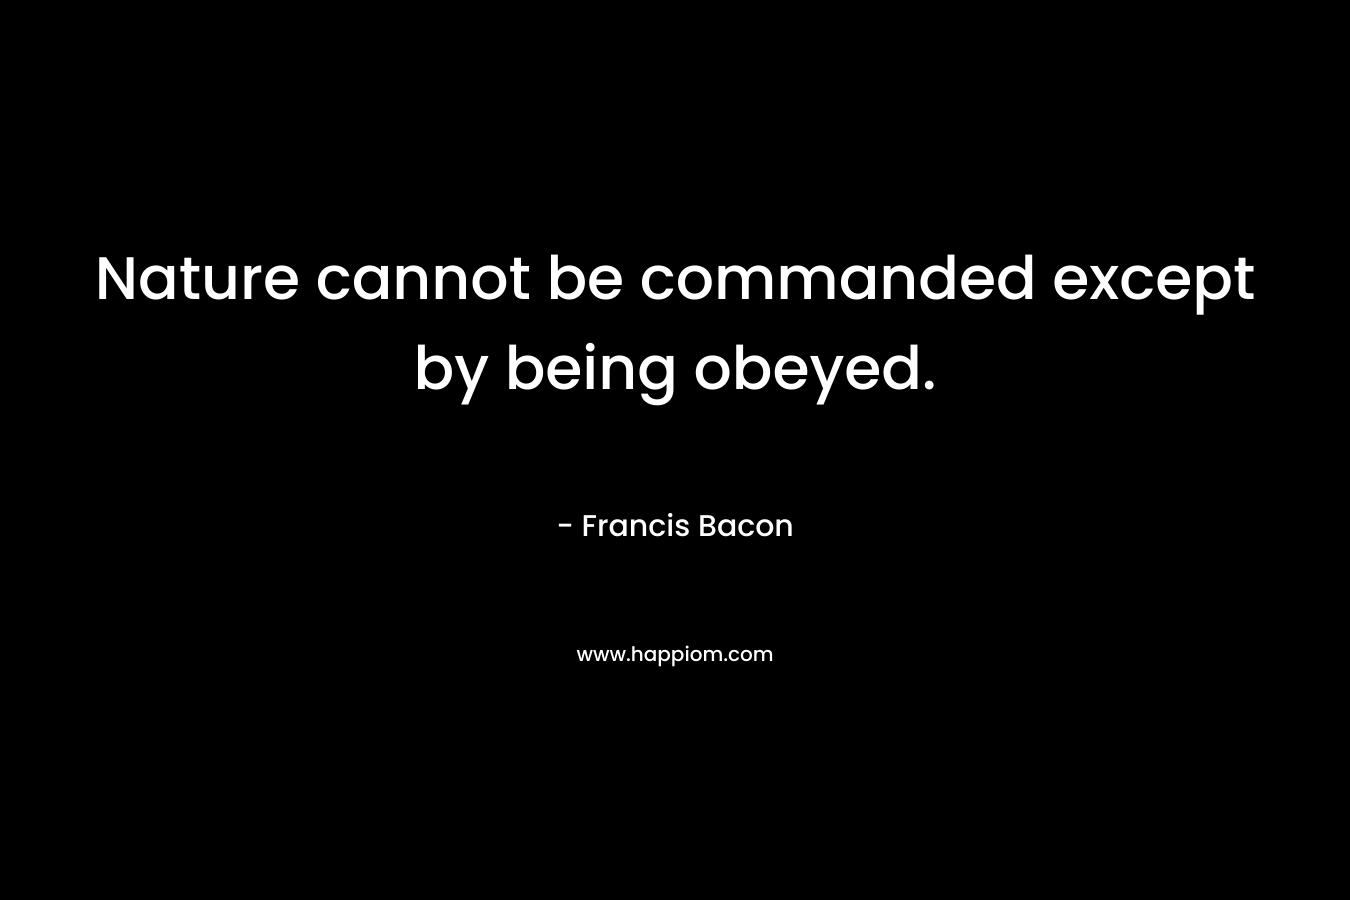 Nature cannot be commanded except by being obeyed.